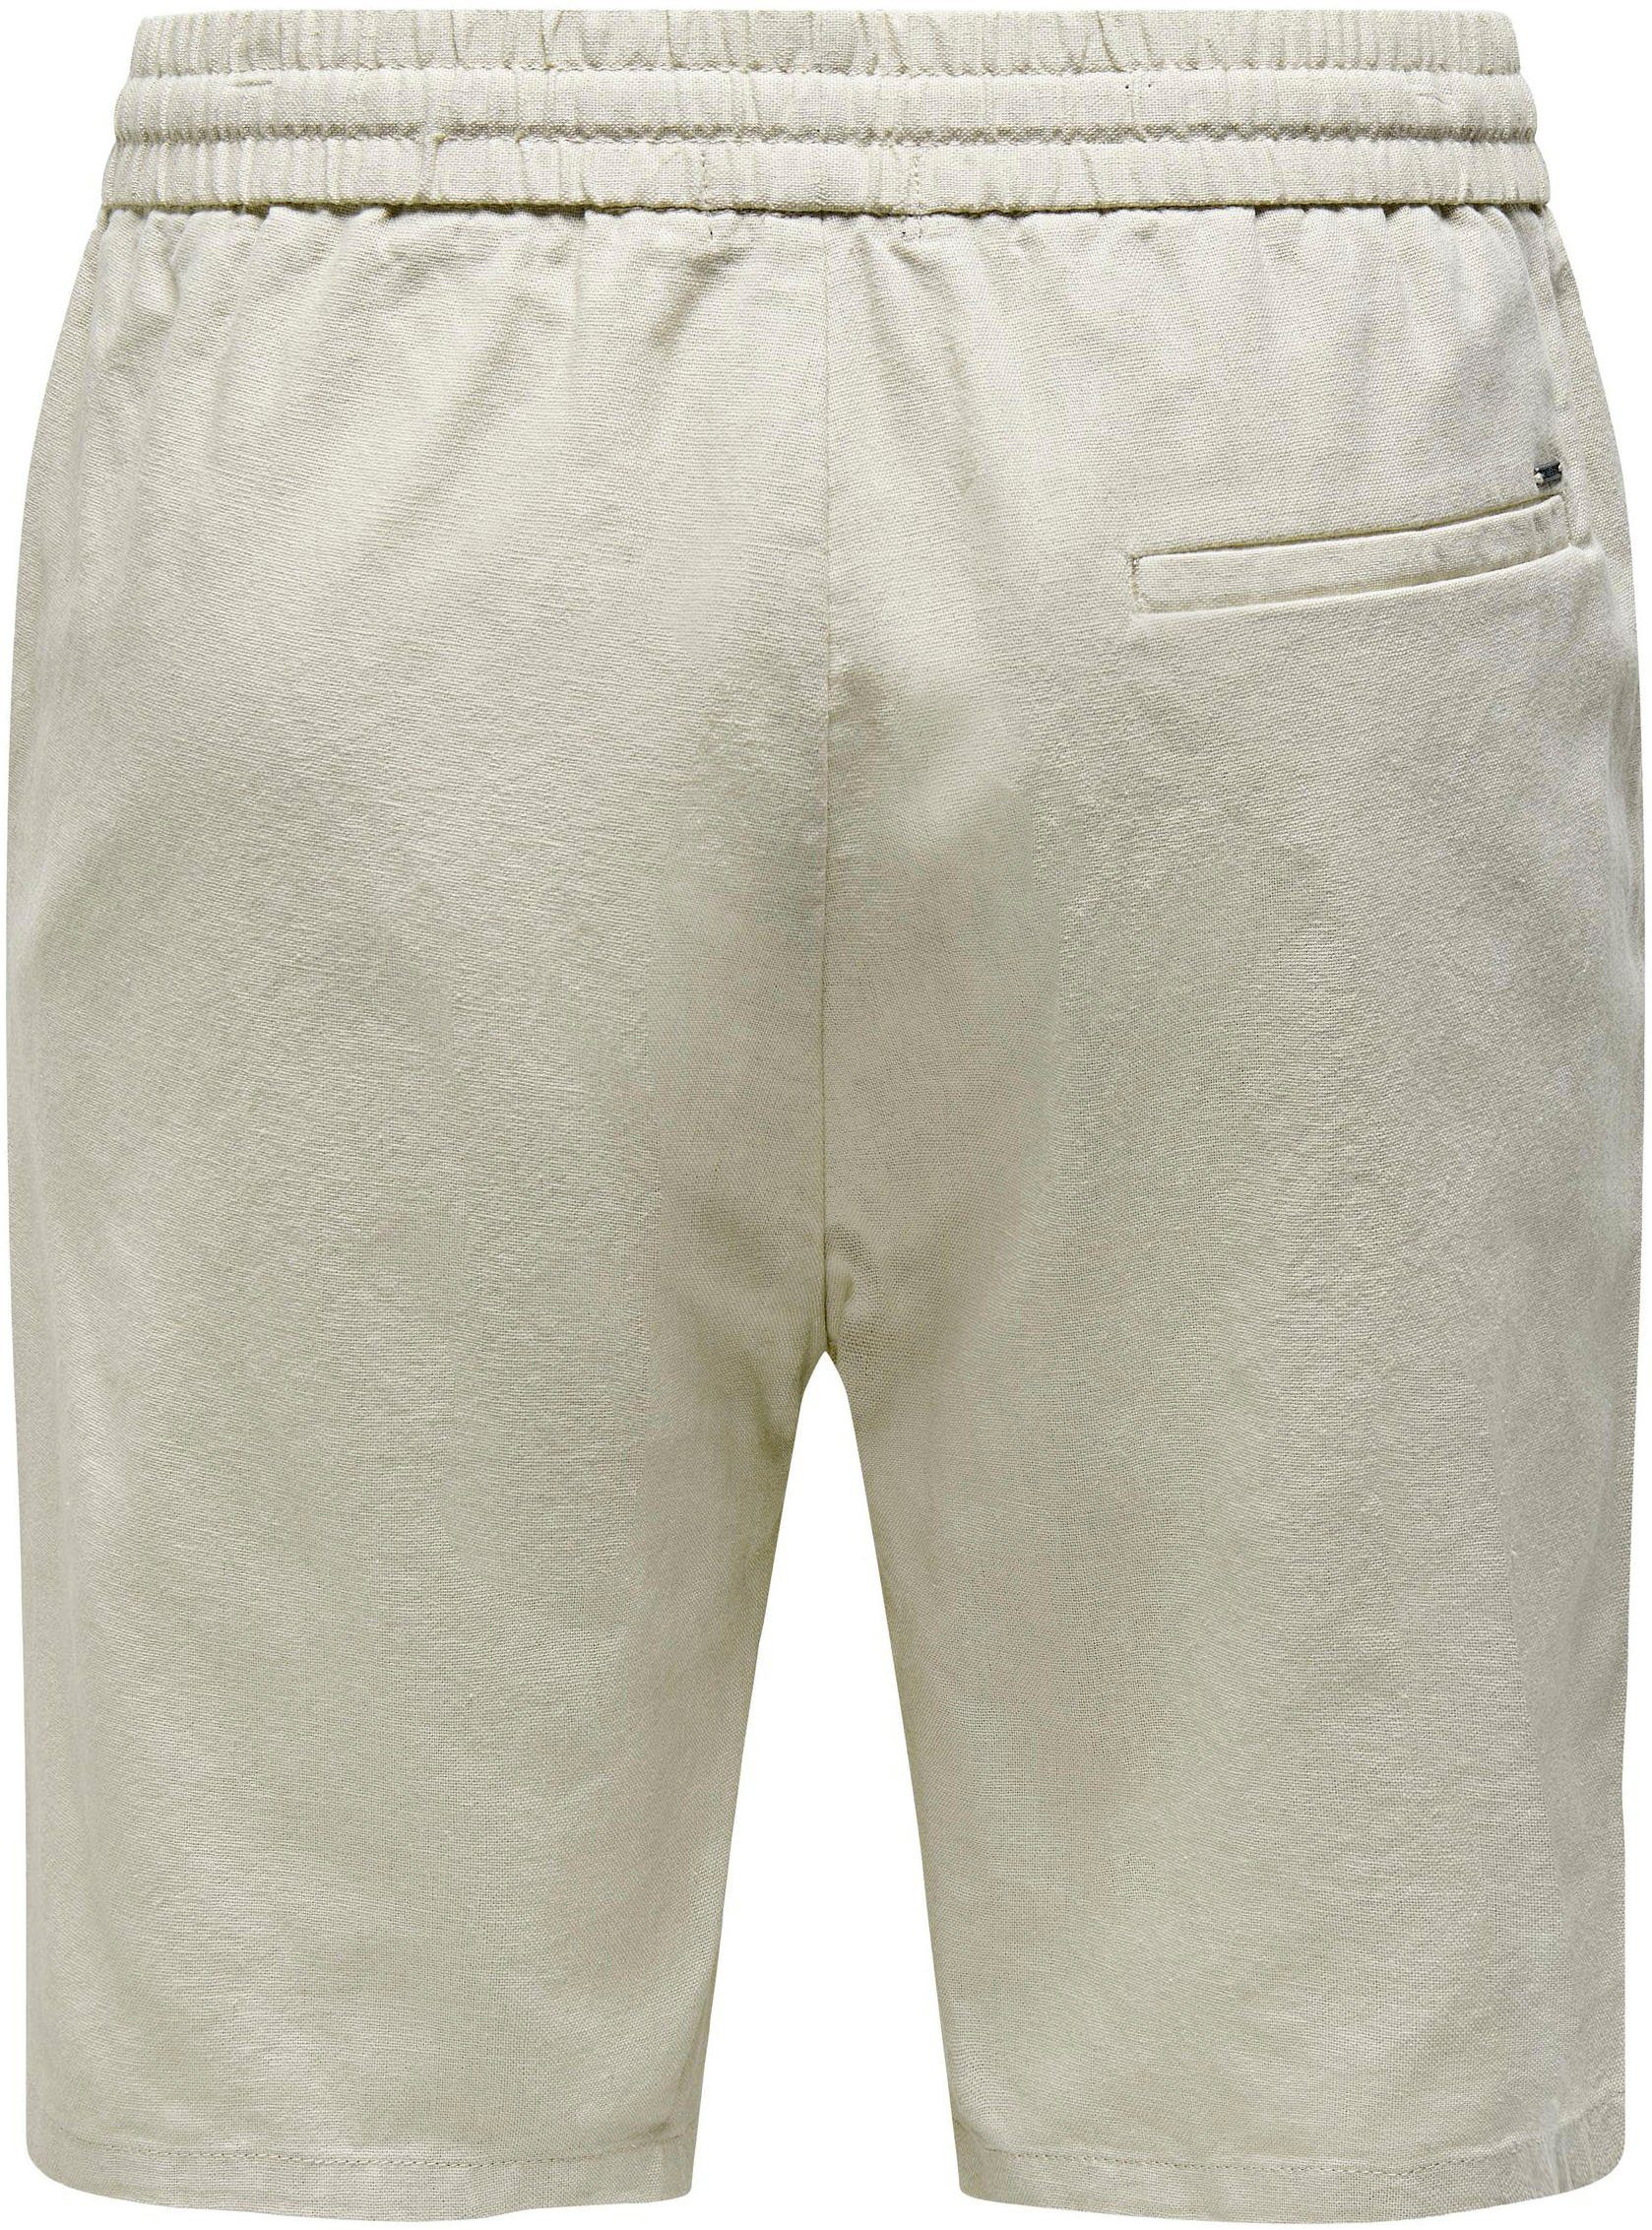 ONLY & SONS LIN COT Shorts NOOS ONSLINUS Silver SHORTS Lining 0007